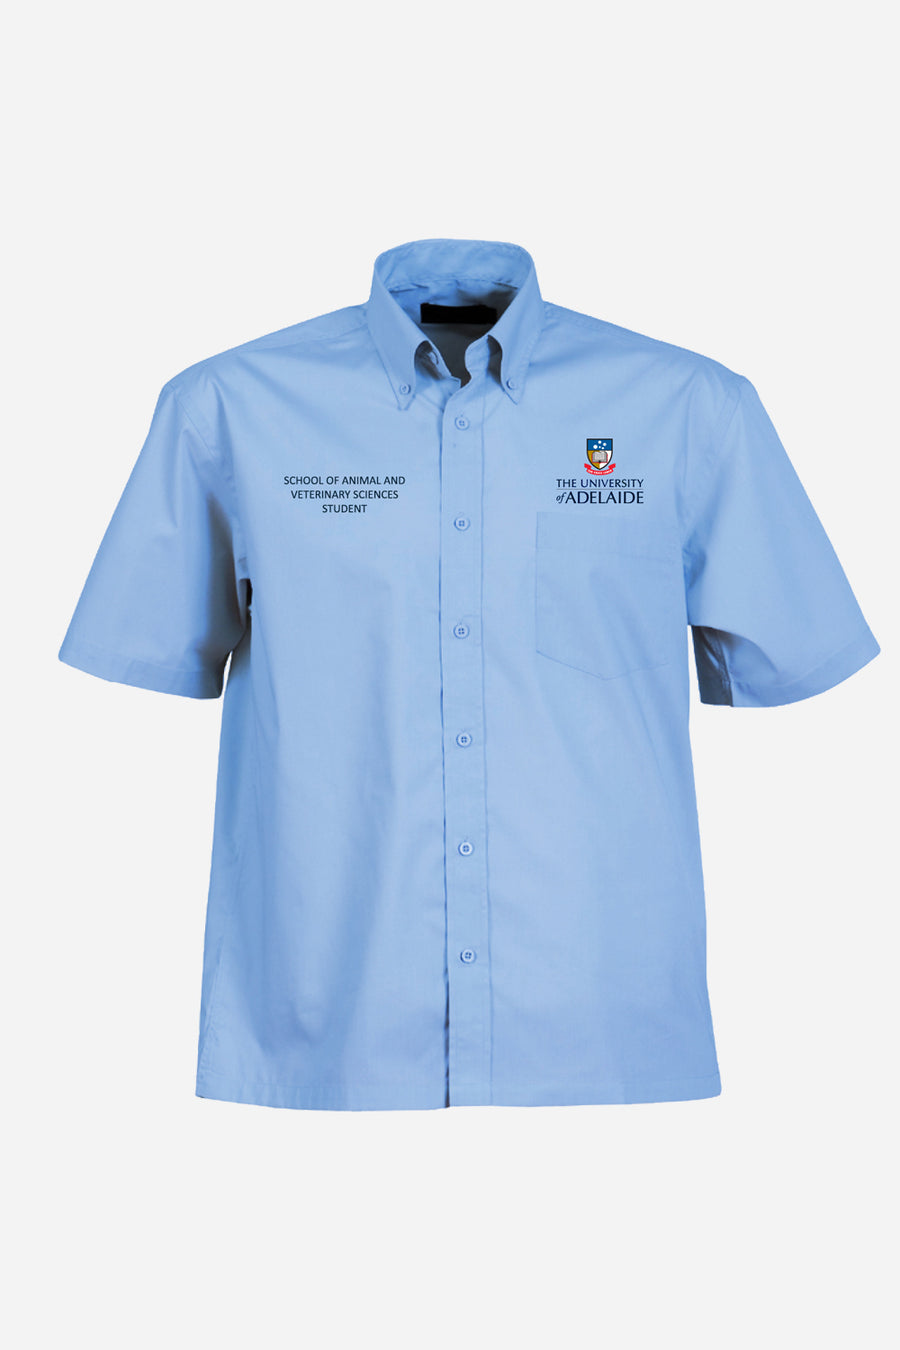 Mens Placement Clinic Shirt - The Adelaide Store